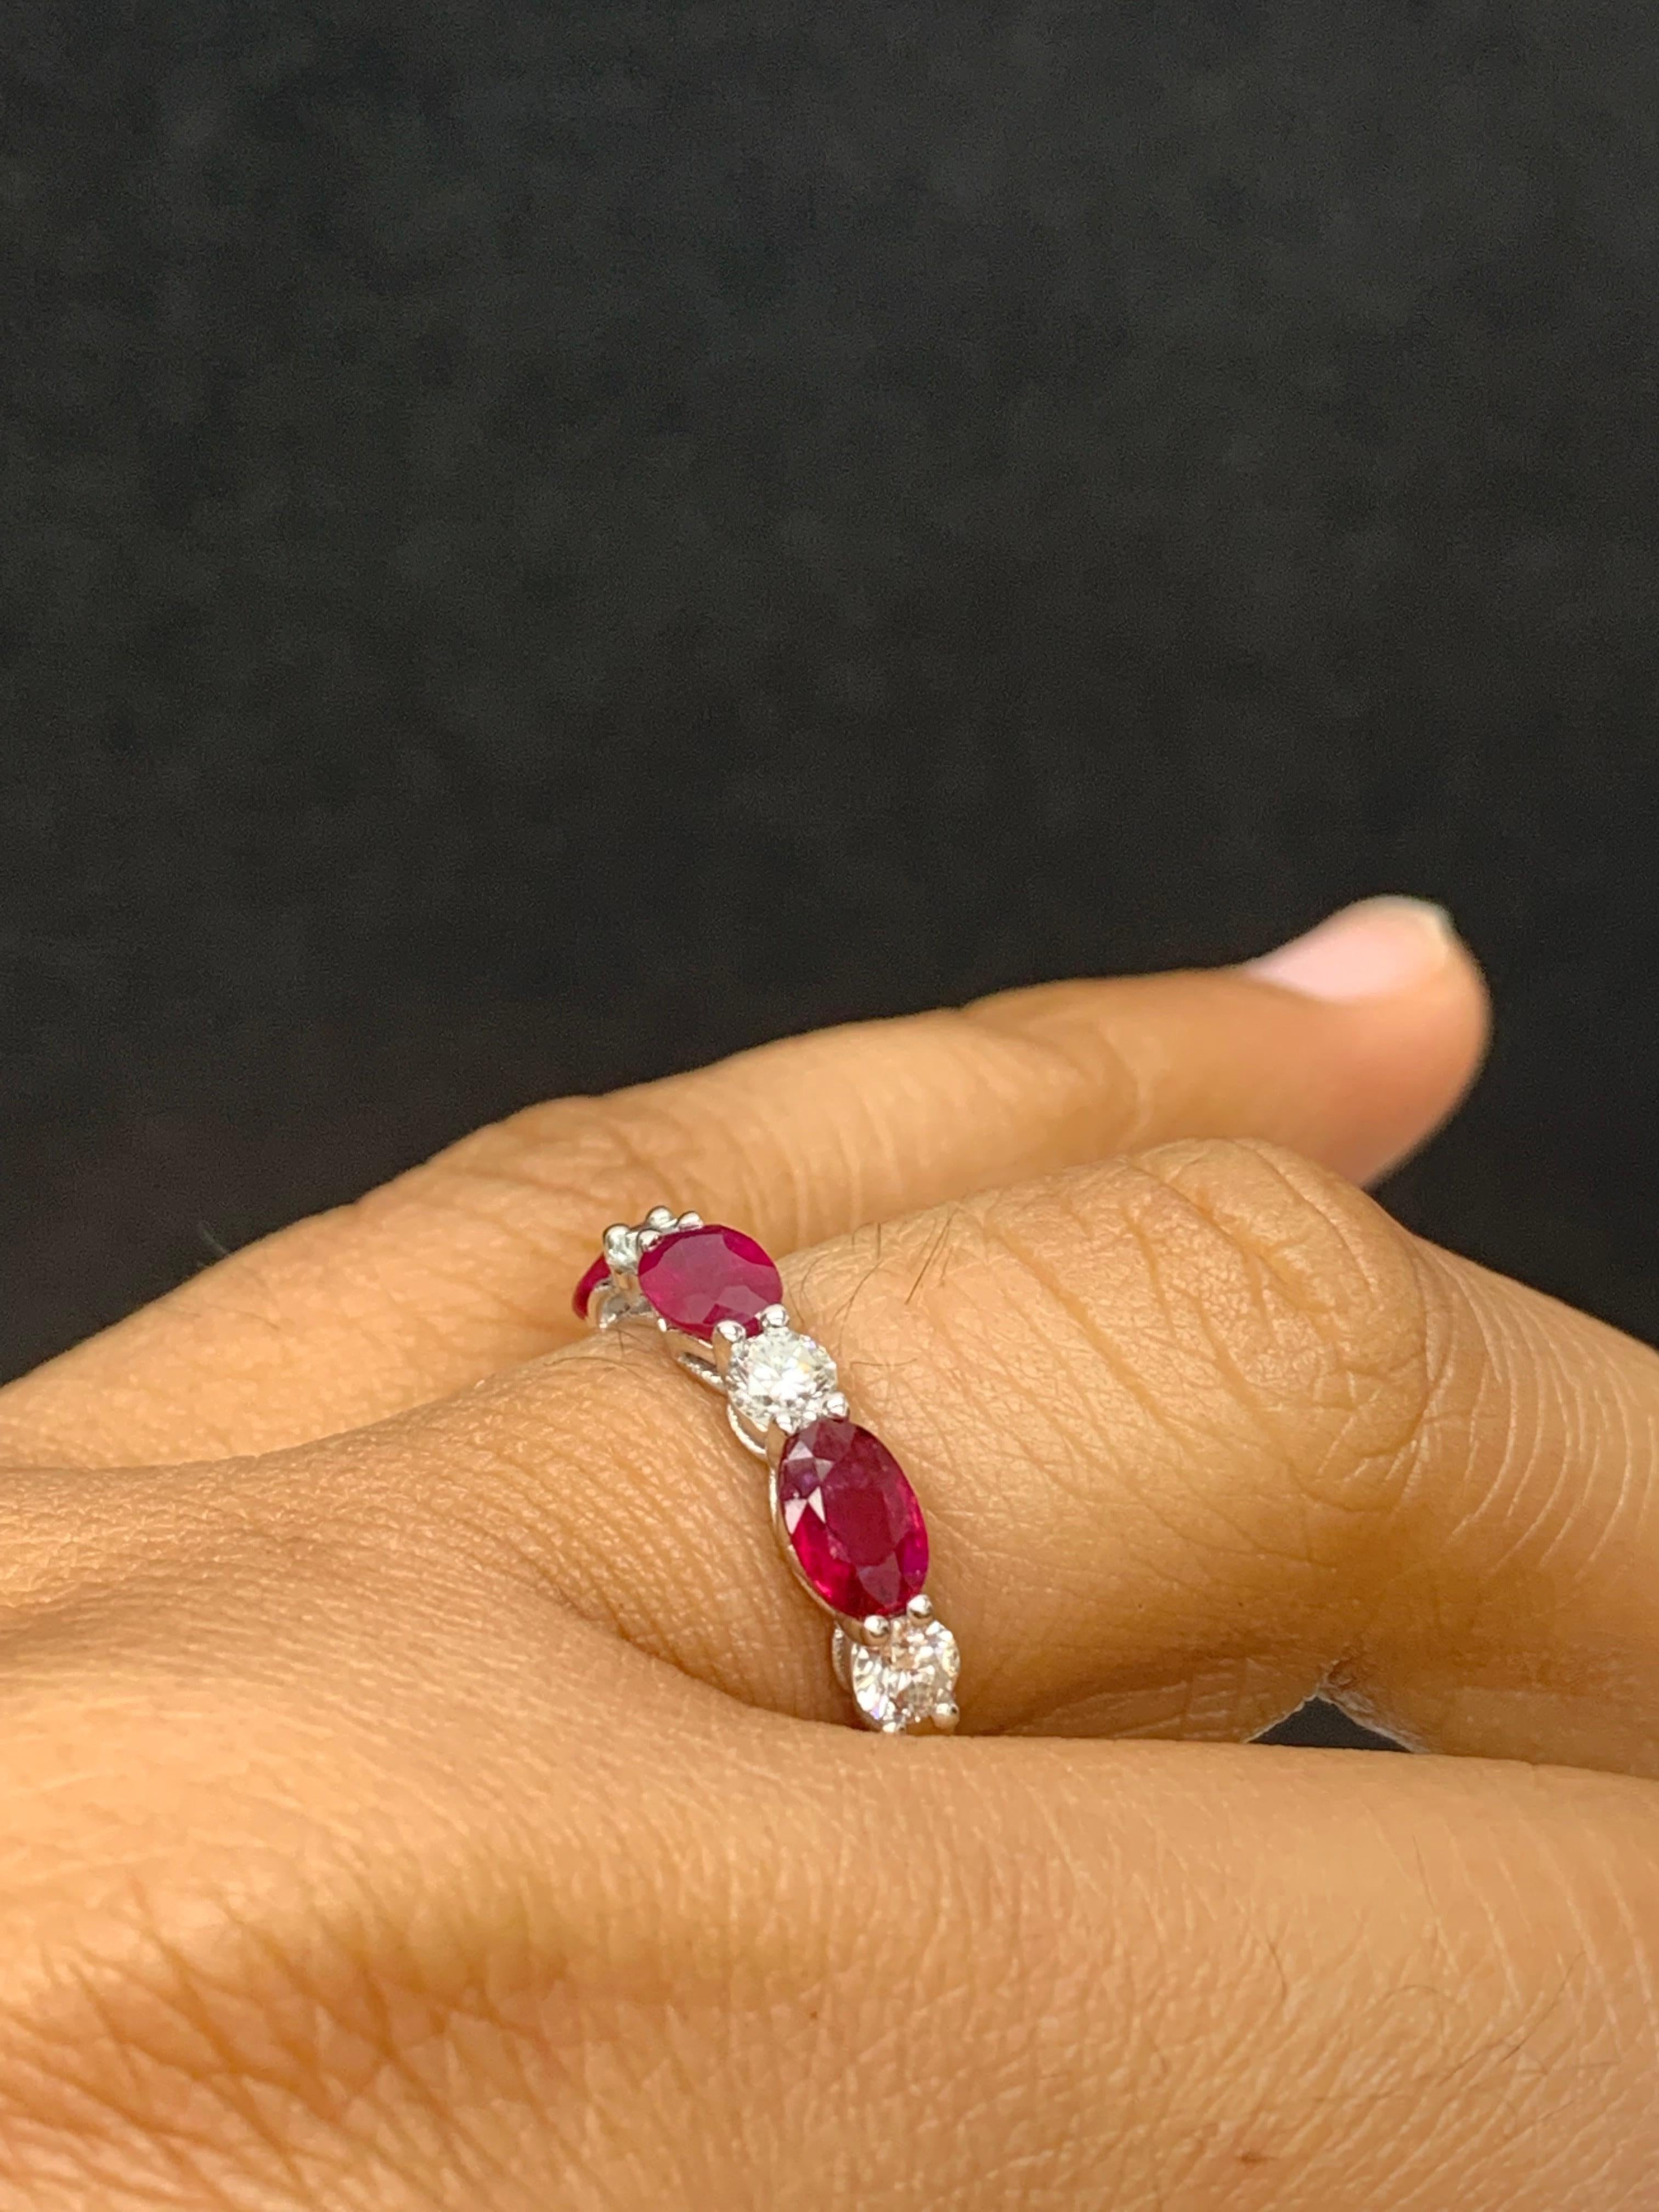 Handcrafted to perfection; showcasing color-rich oval cut rubies that elegantly alternate round diamonds in a 14k white gold setting. 
The 3 rubies weigh 1.71 carats total and 4 diamonds weigh 0.61 carats total.

Size 6.5 US (Sizable). One of a Kind